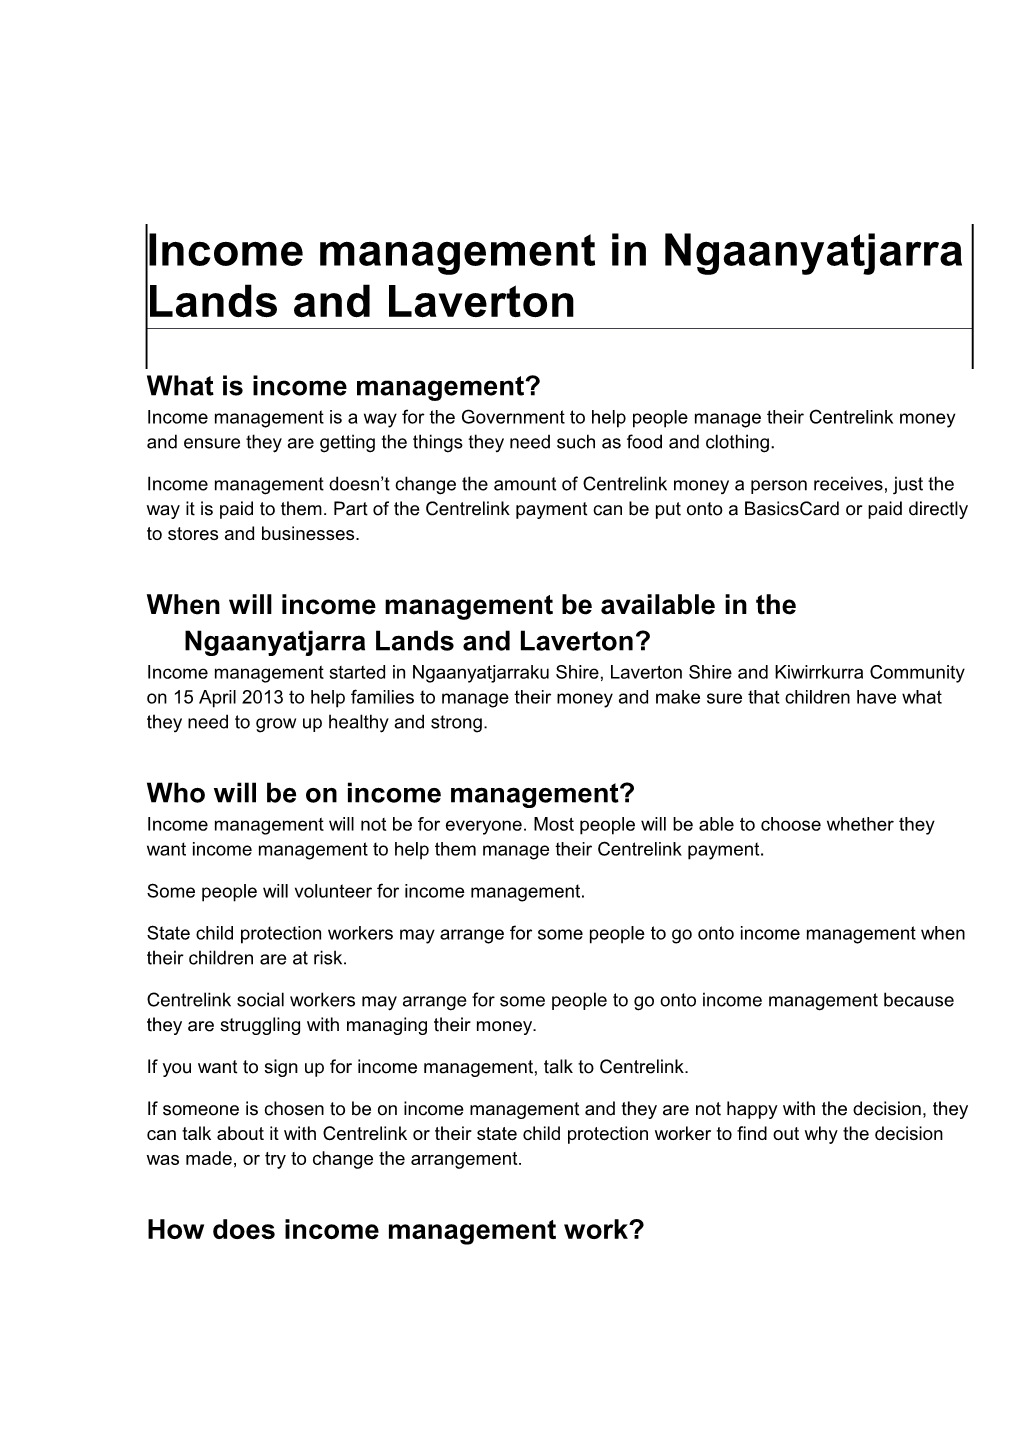 What Is Income Management?